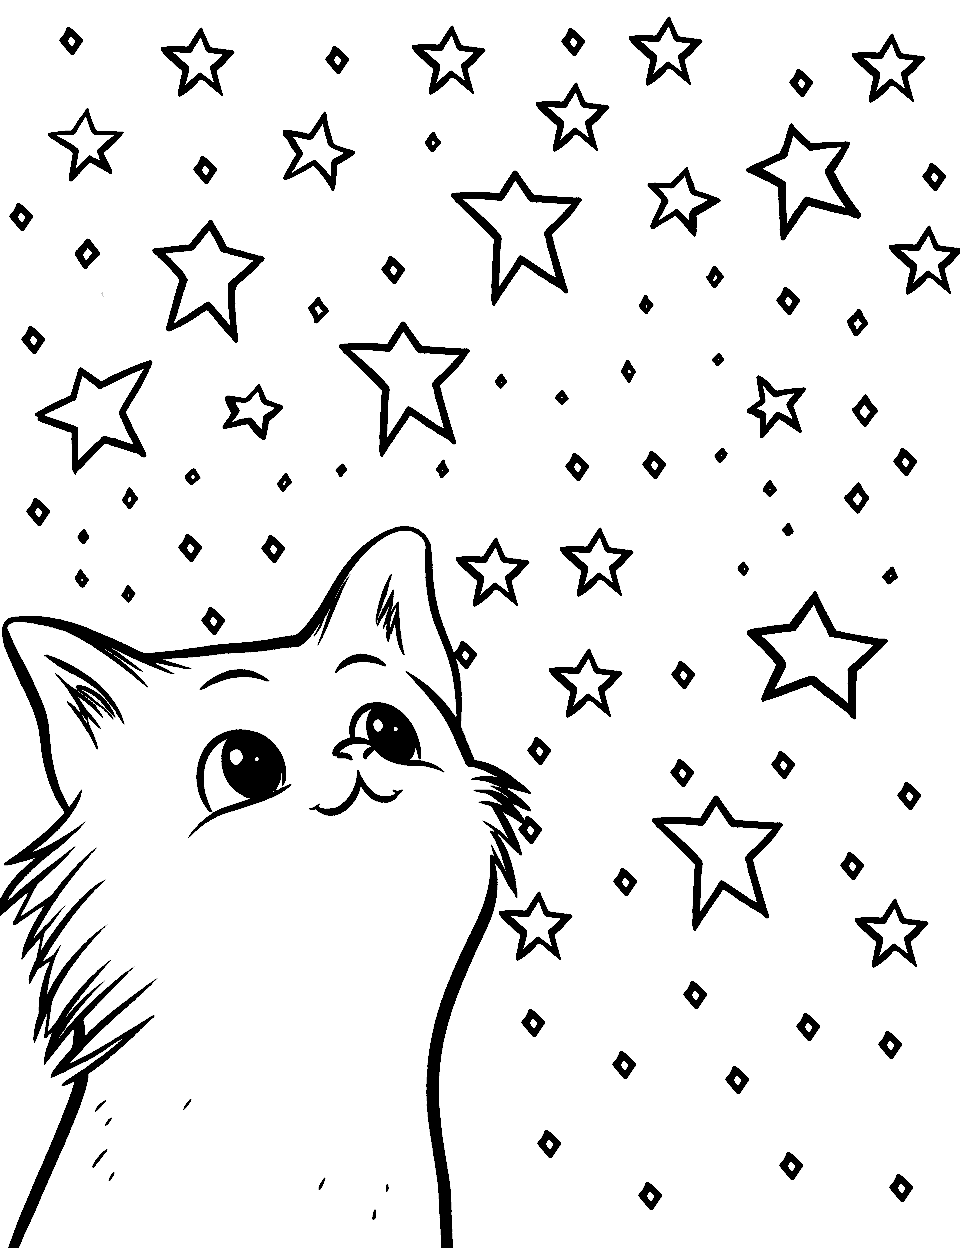 Starry Eyed Cat Star Coloring Page - A cute cat gazing up at a sky filled with stars.